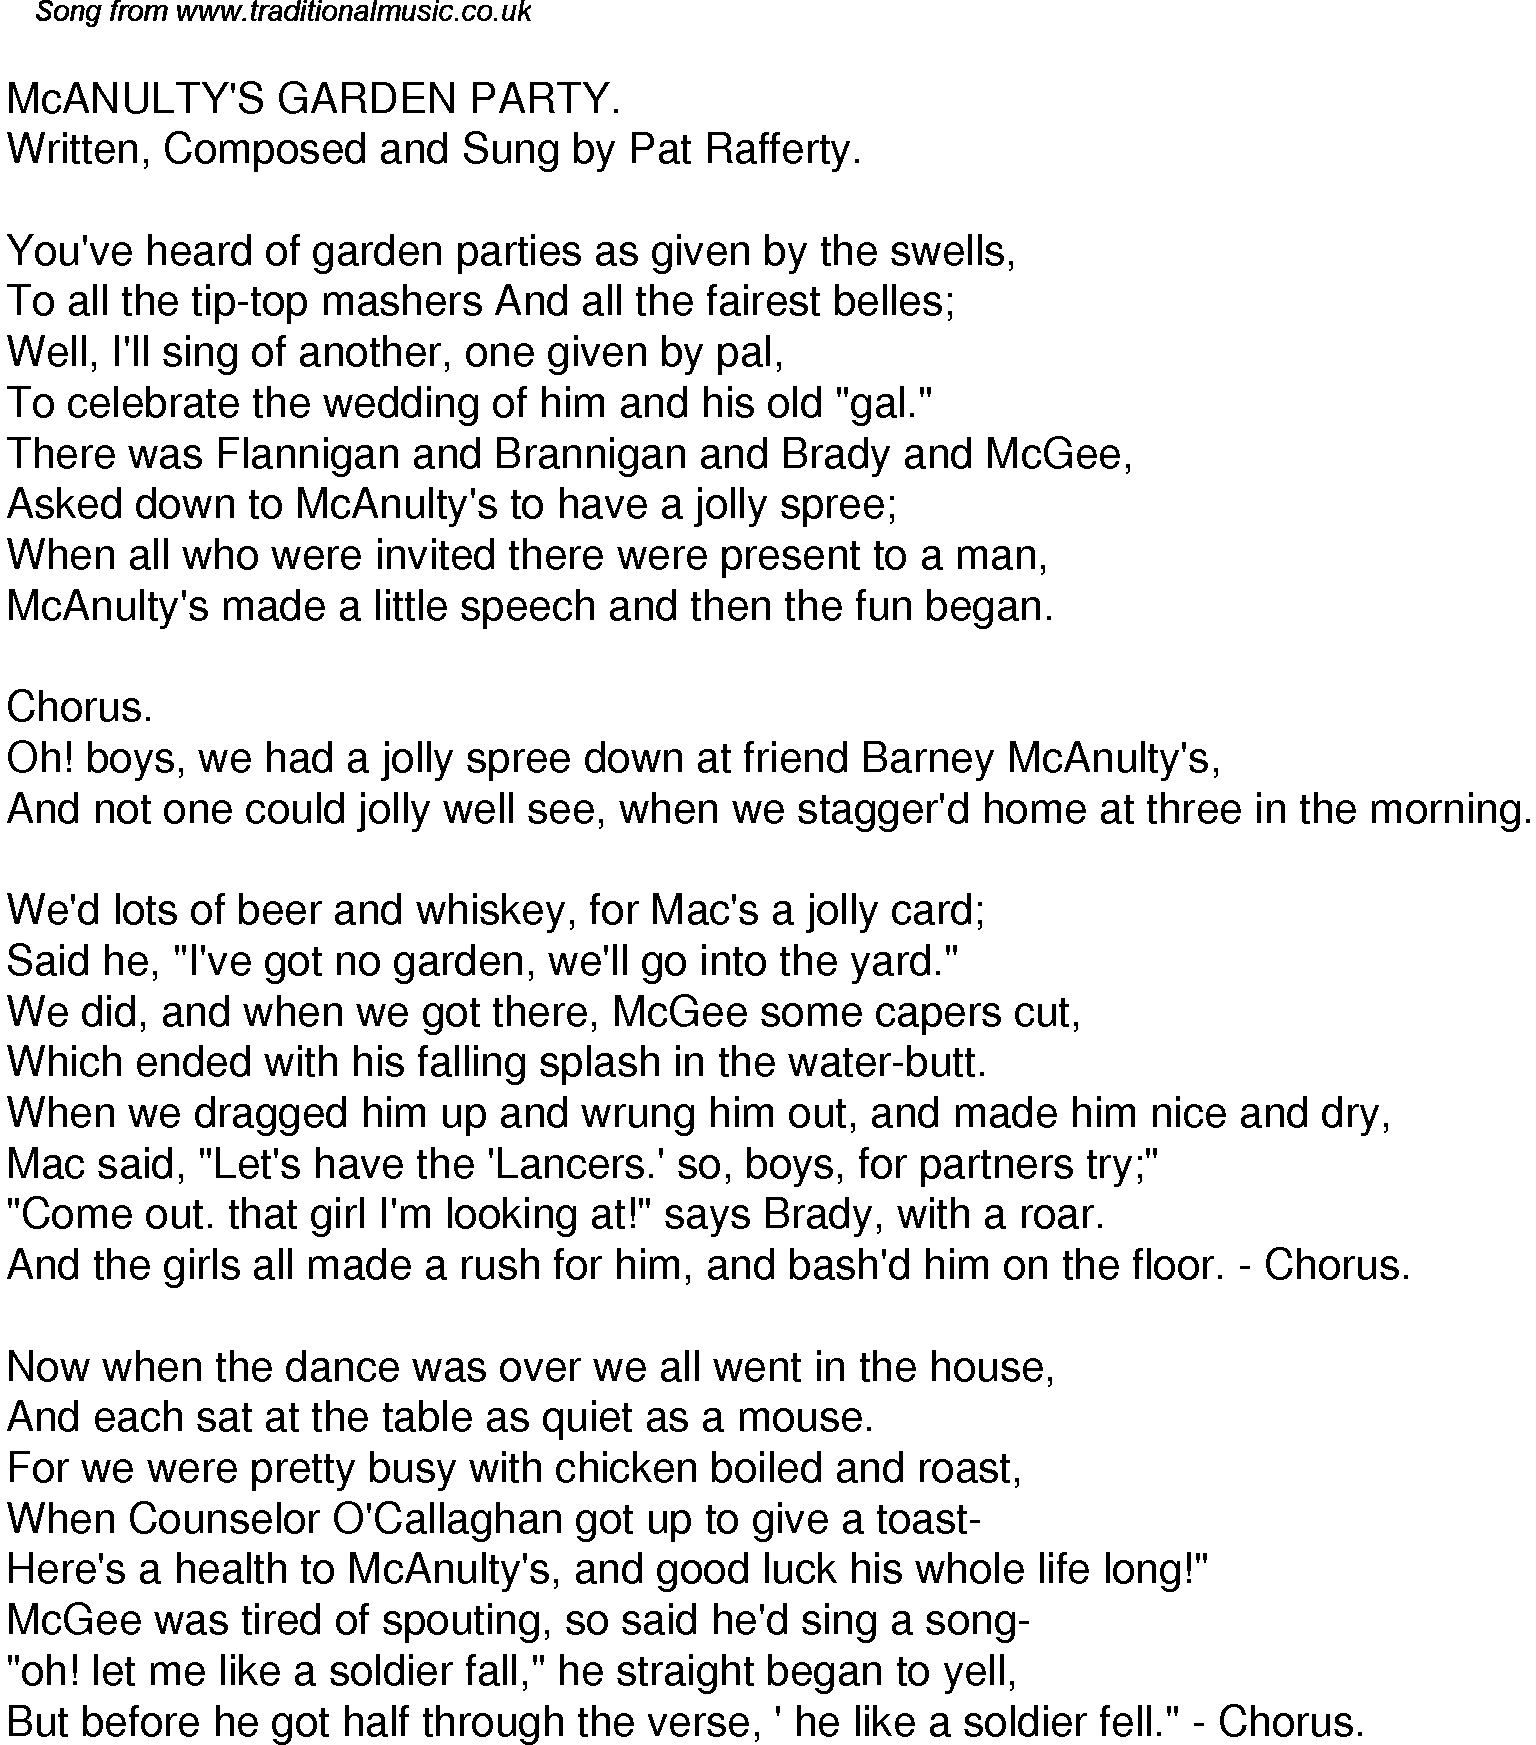 Old Time Song Lyrics for 35 Mcanultys Garden Party